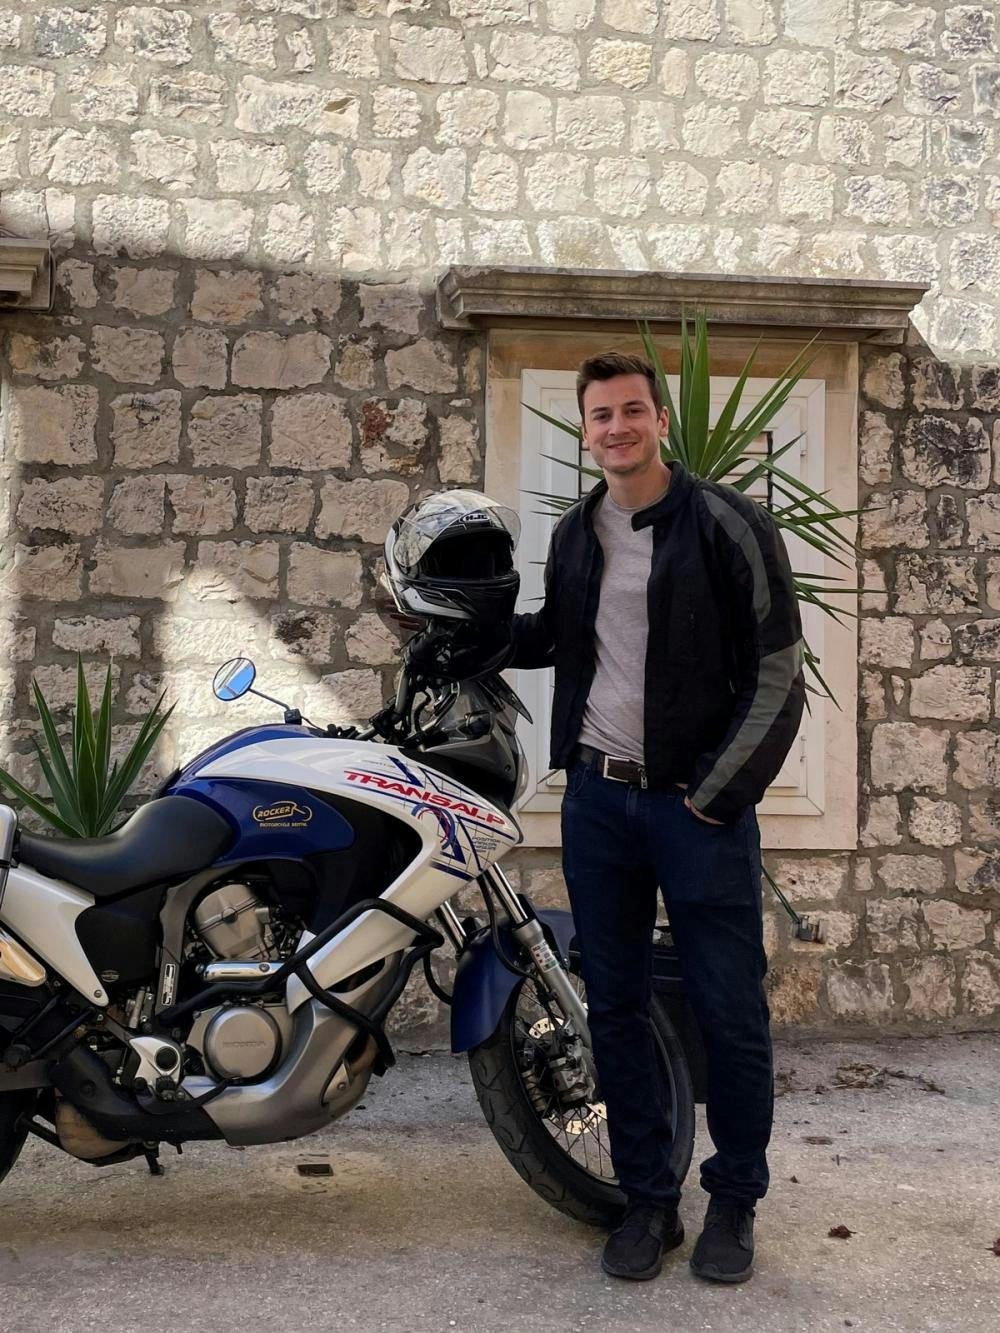 Kieran standing with a motorcycle in front of stone wall